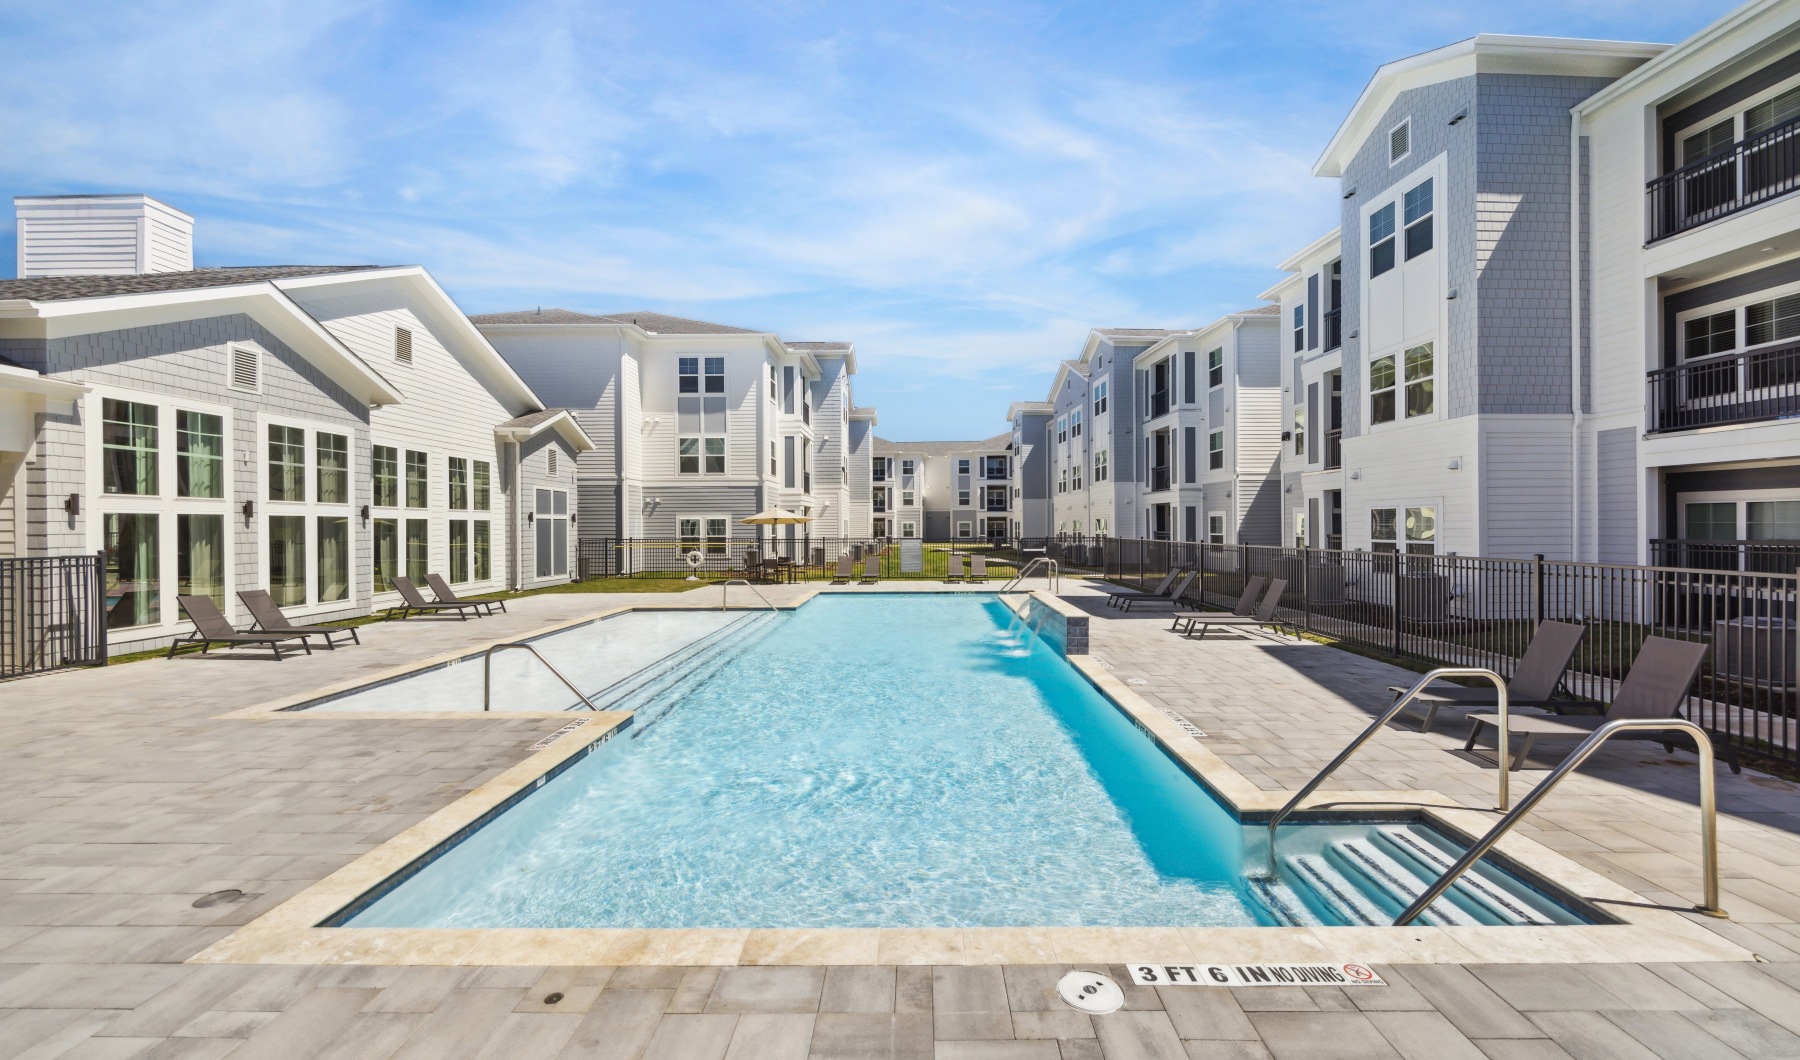 Experience the Willow Plaza Lifestyle